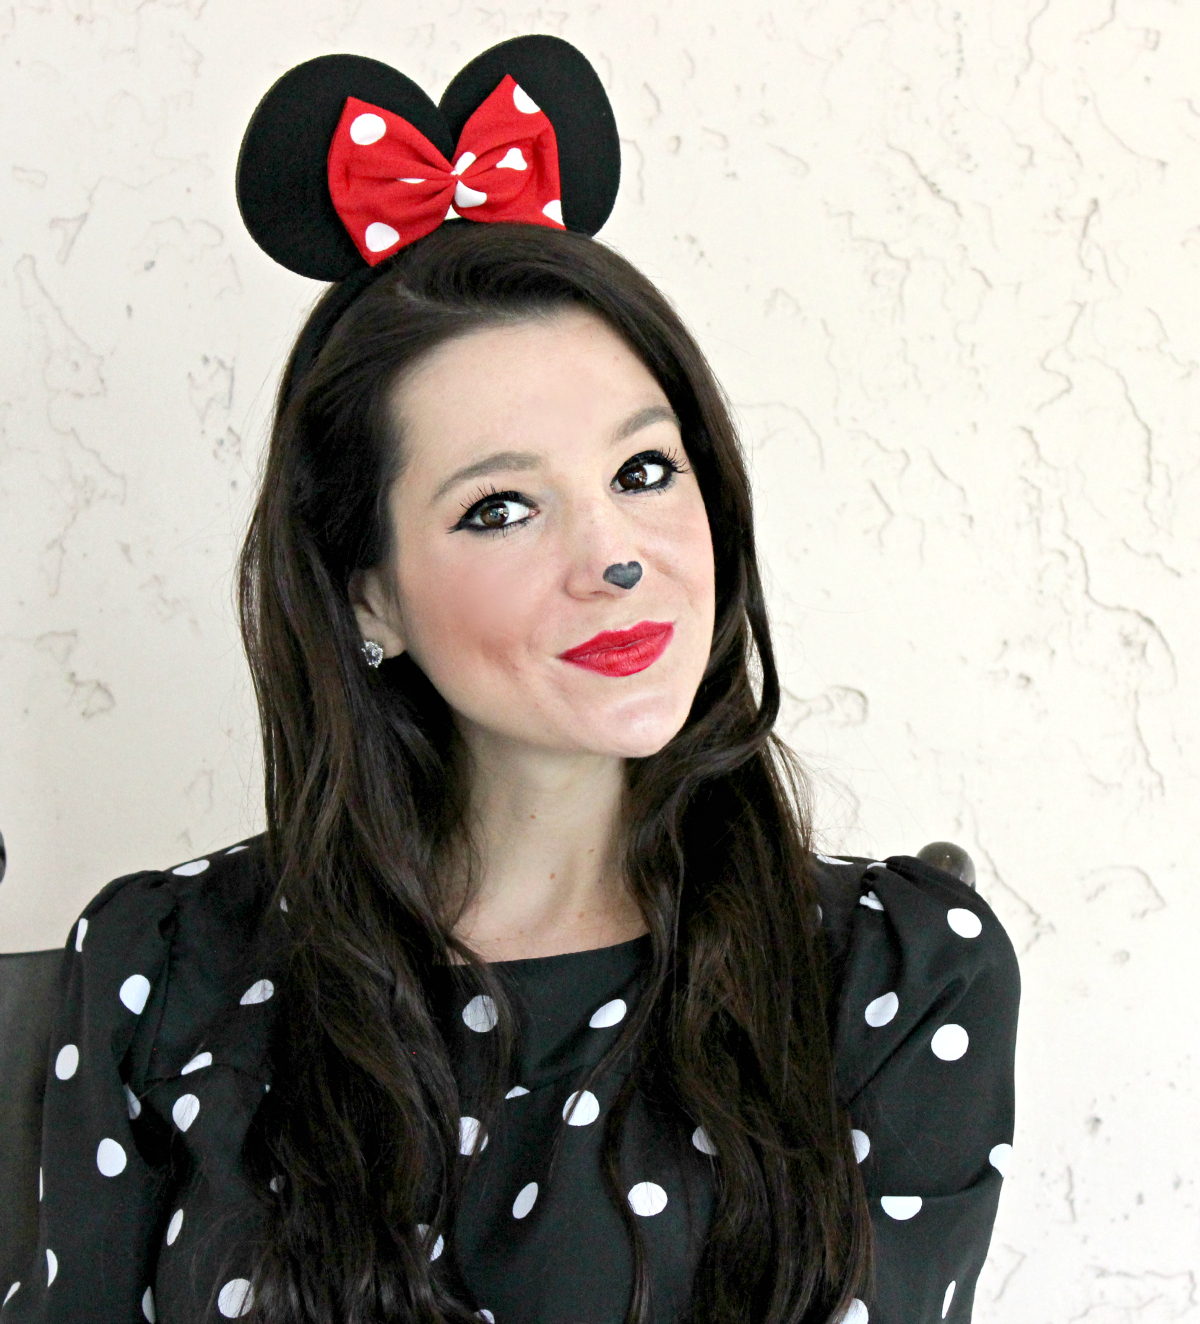 Simple Minnie Mouse Makeup Tutorial for Halloween